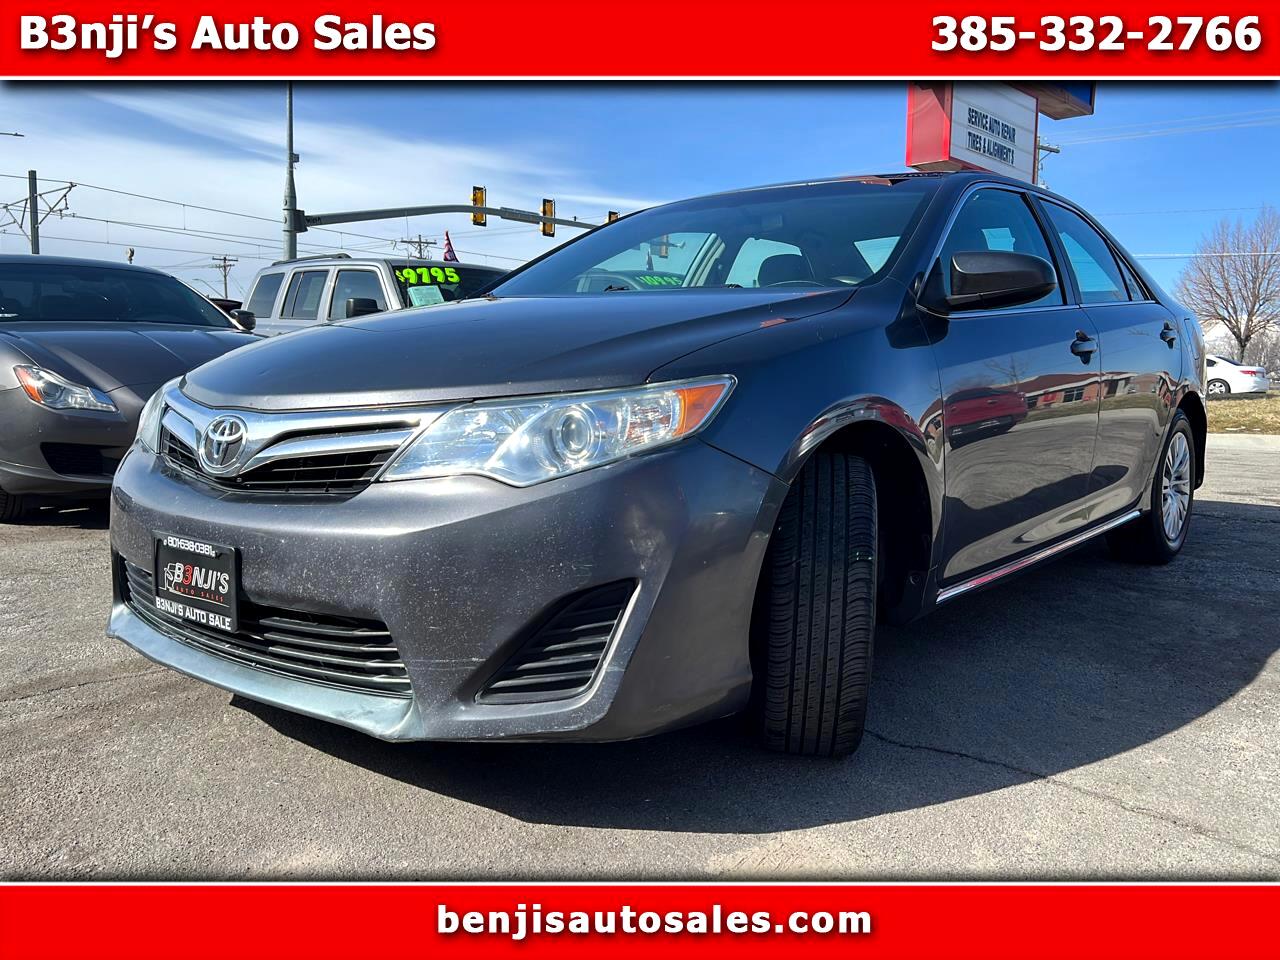 2012 Toyota Camry 4dr Sdn I4 Auto XLE (Natl)